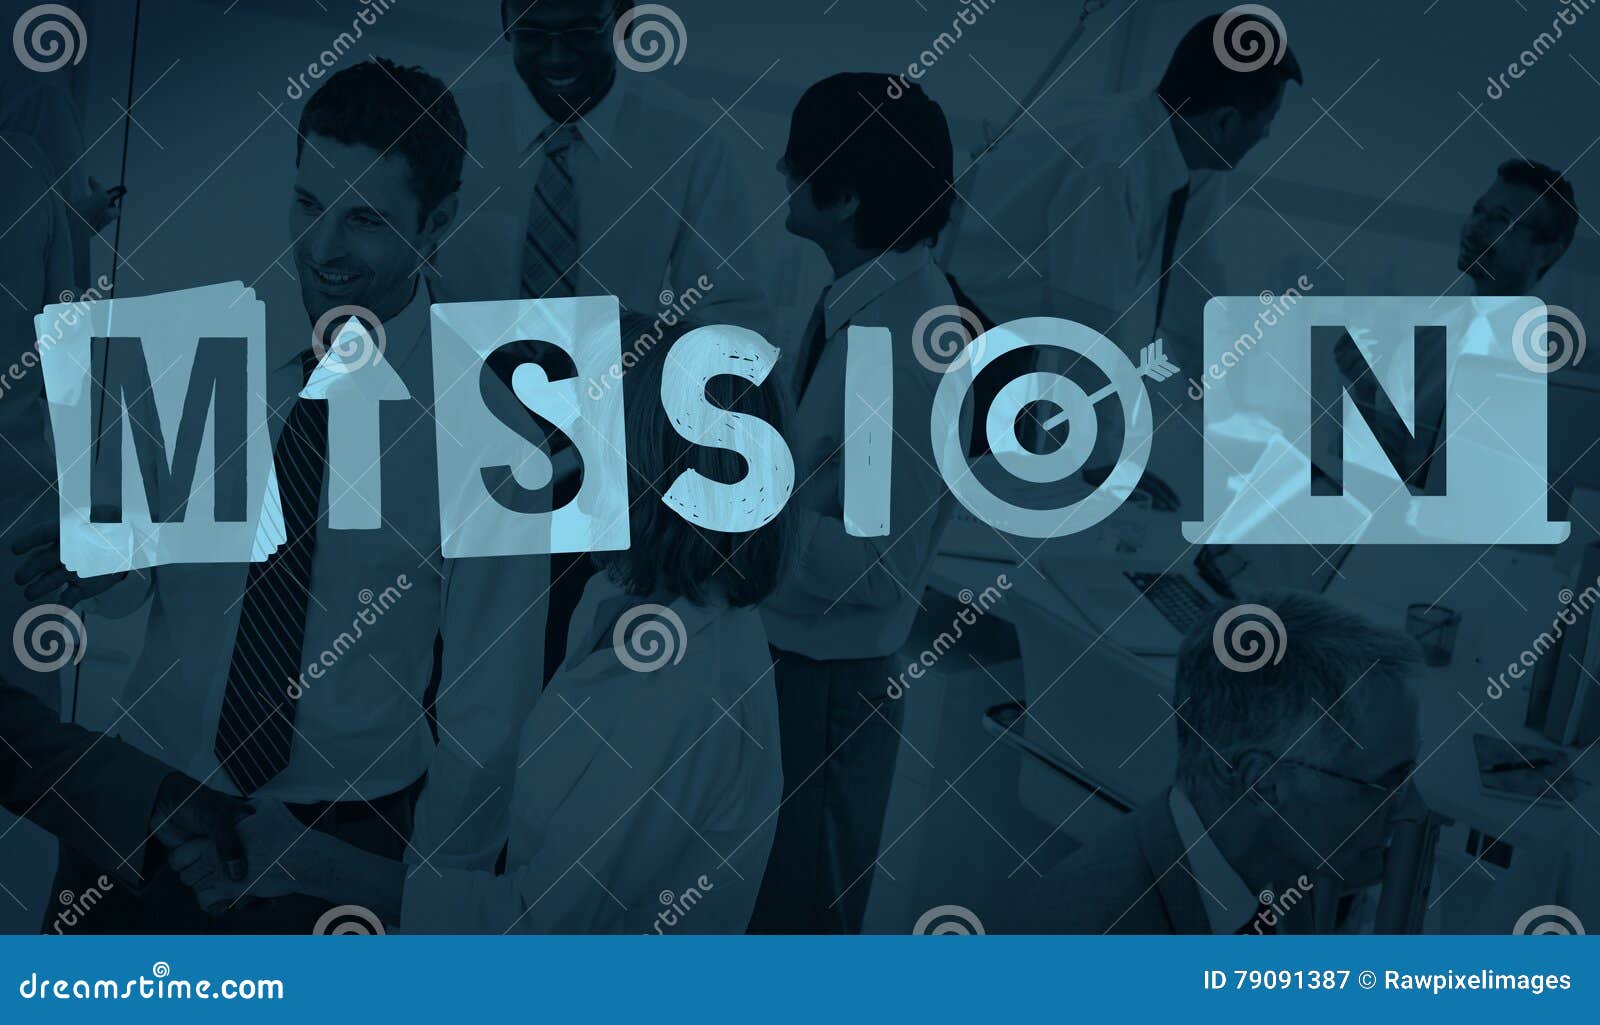 mission objective plan strategy target goals aspirations concept